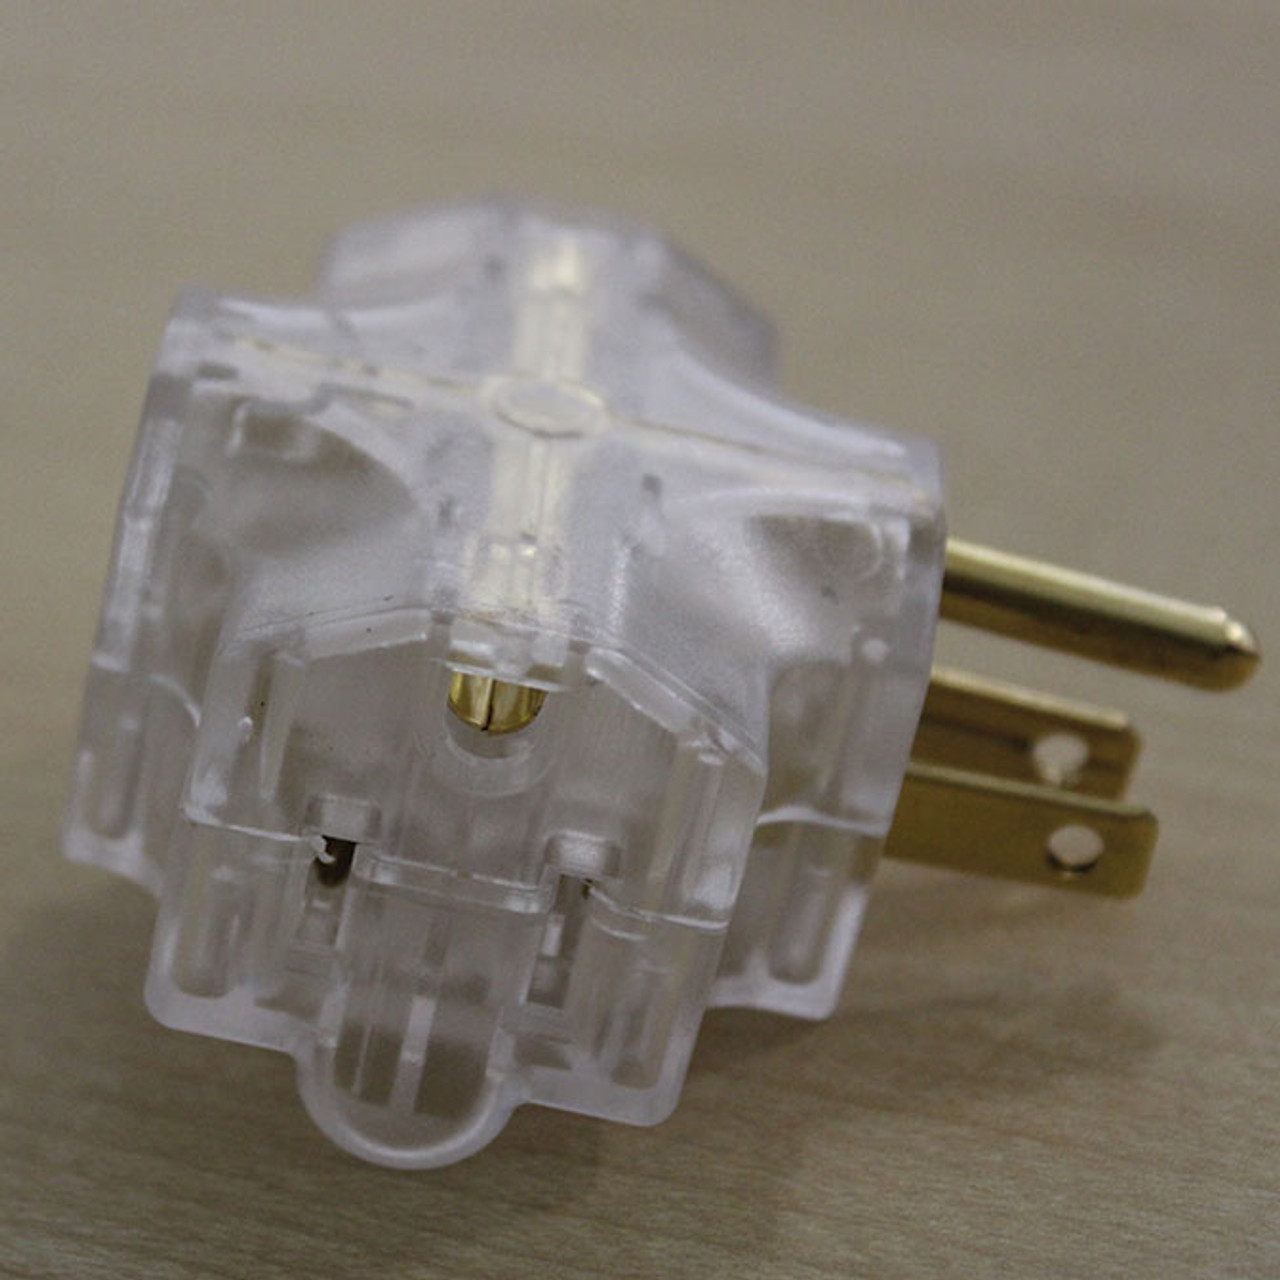 Clear electrical adapter that accepts 3-prong plugs.